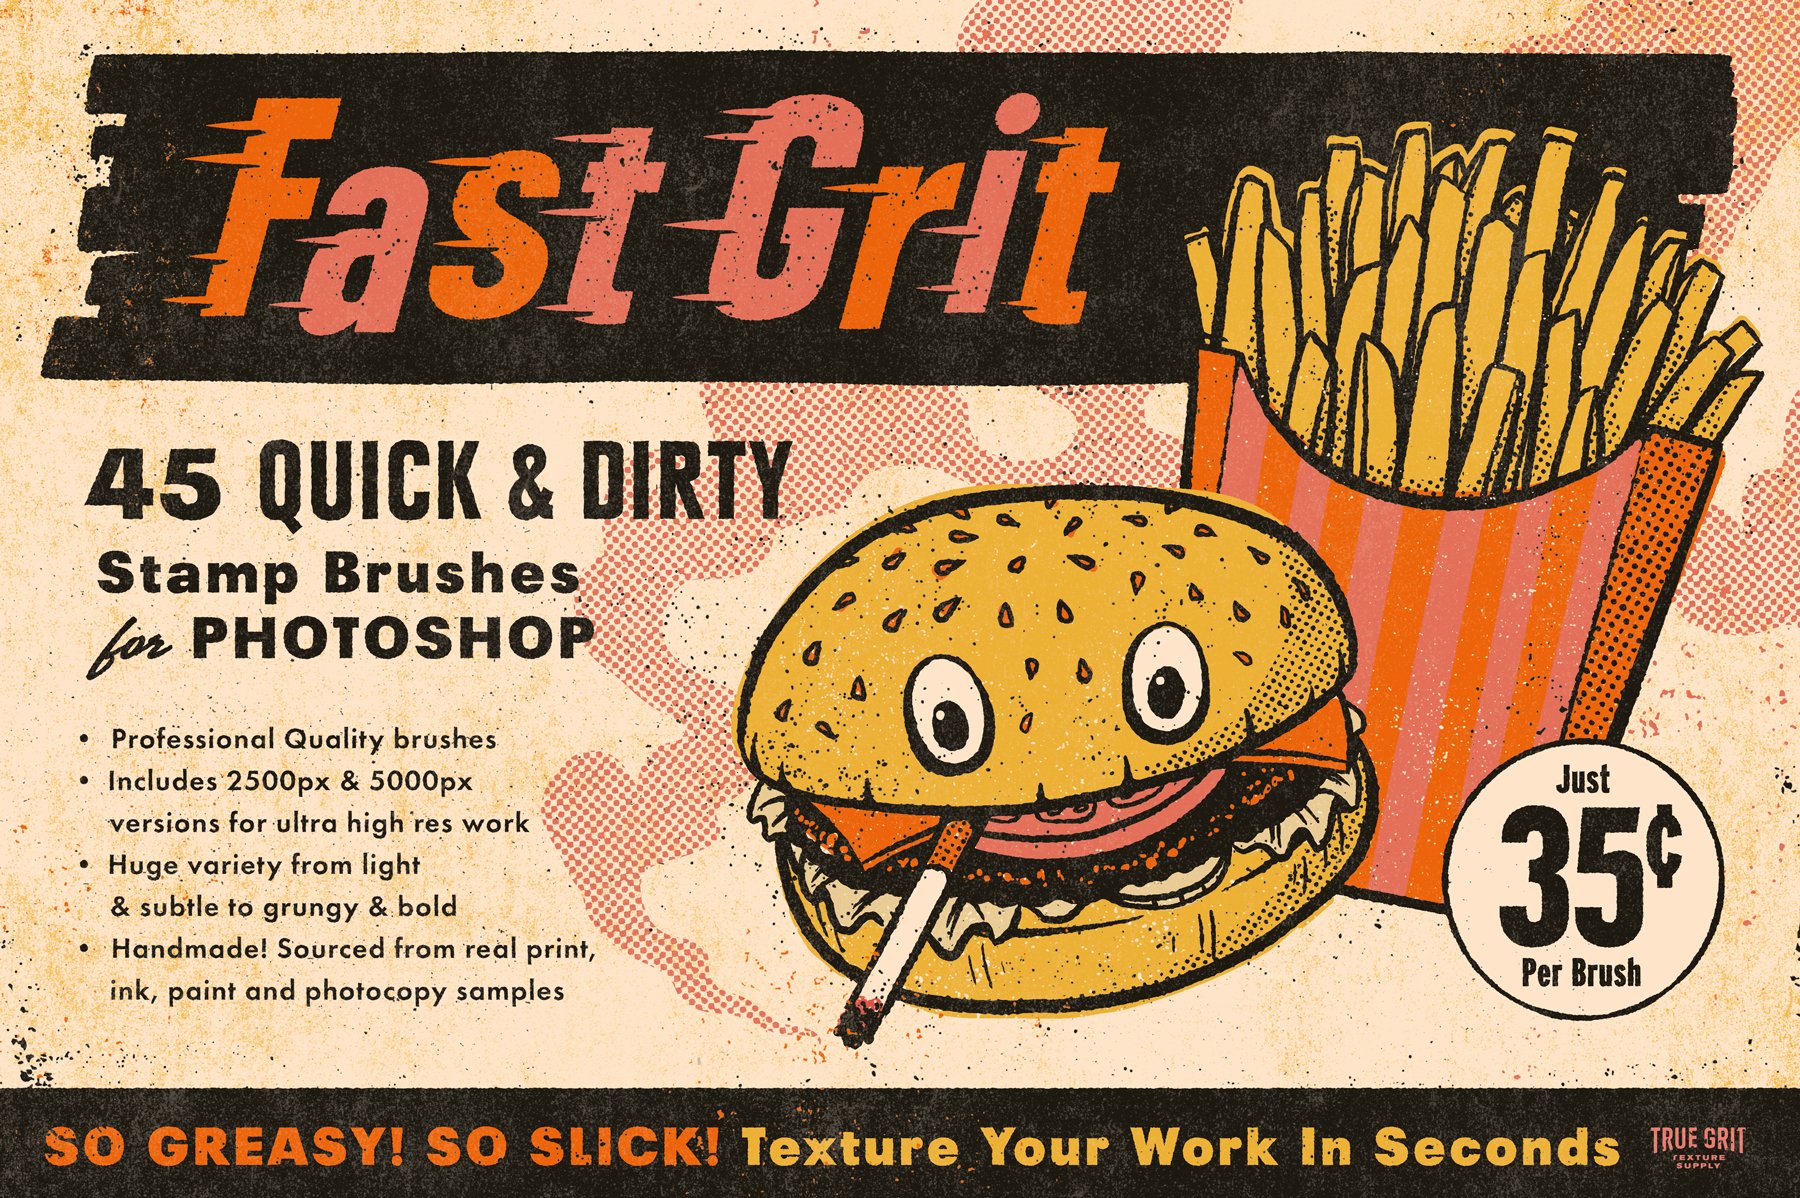 Fast Grit Brushes For Photoshopcover image.